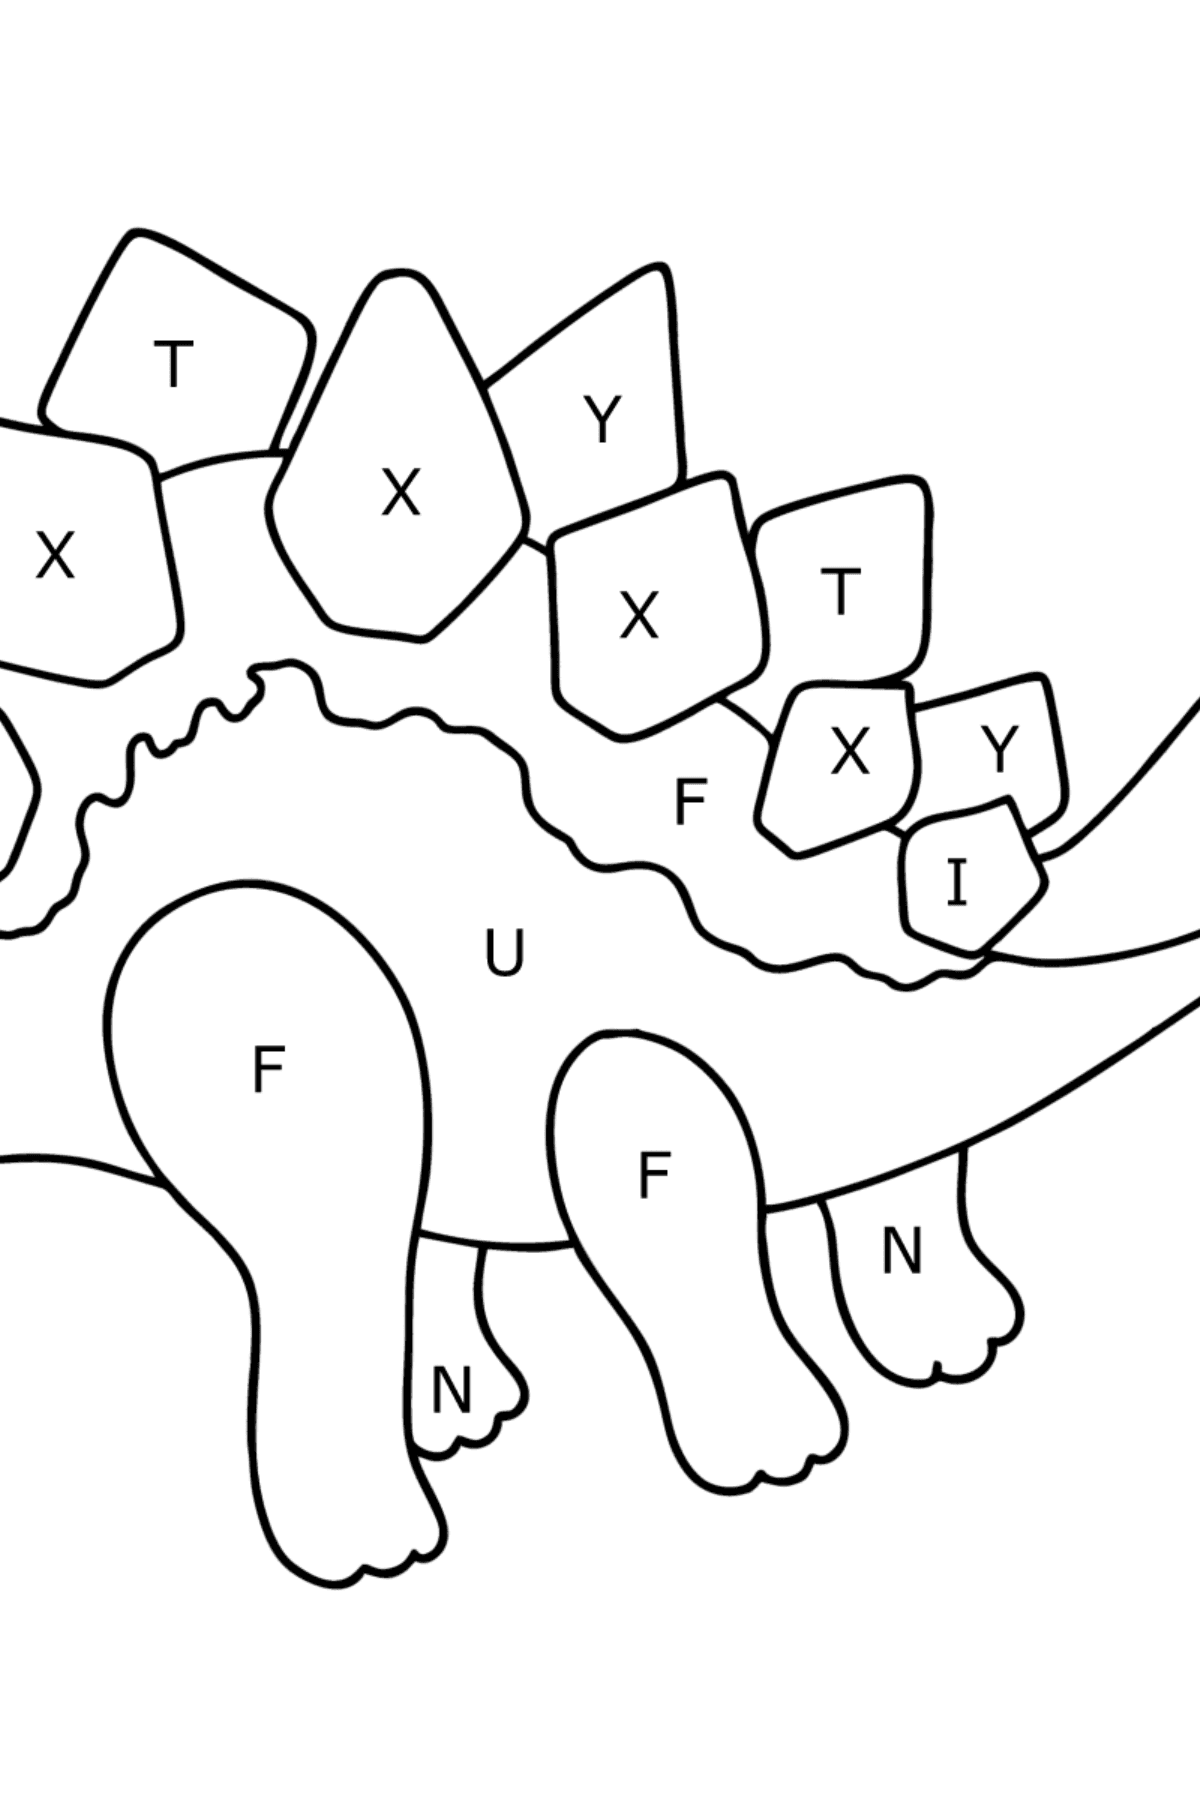 Stegosaurus coloring page - Coloring by Letters for Kids